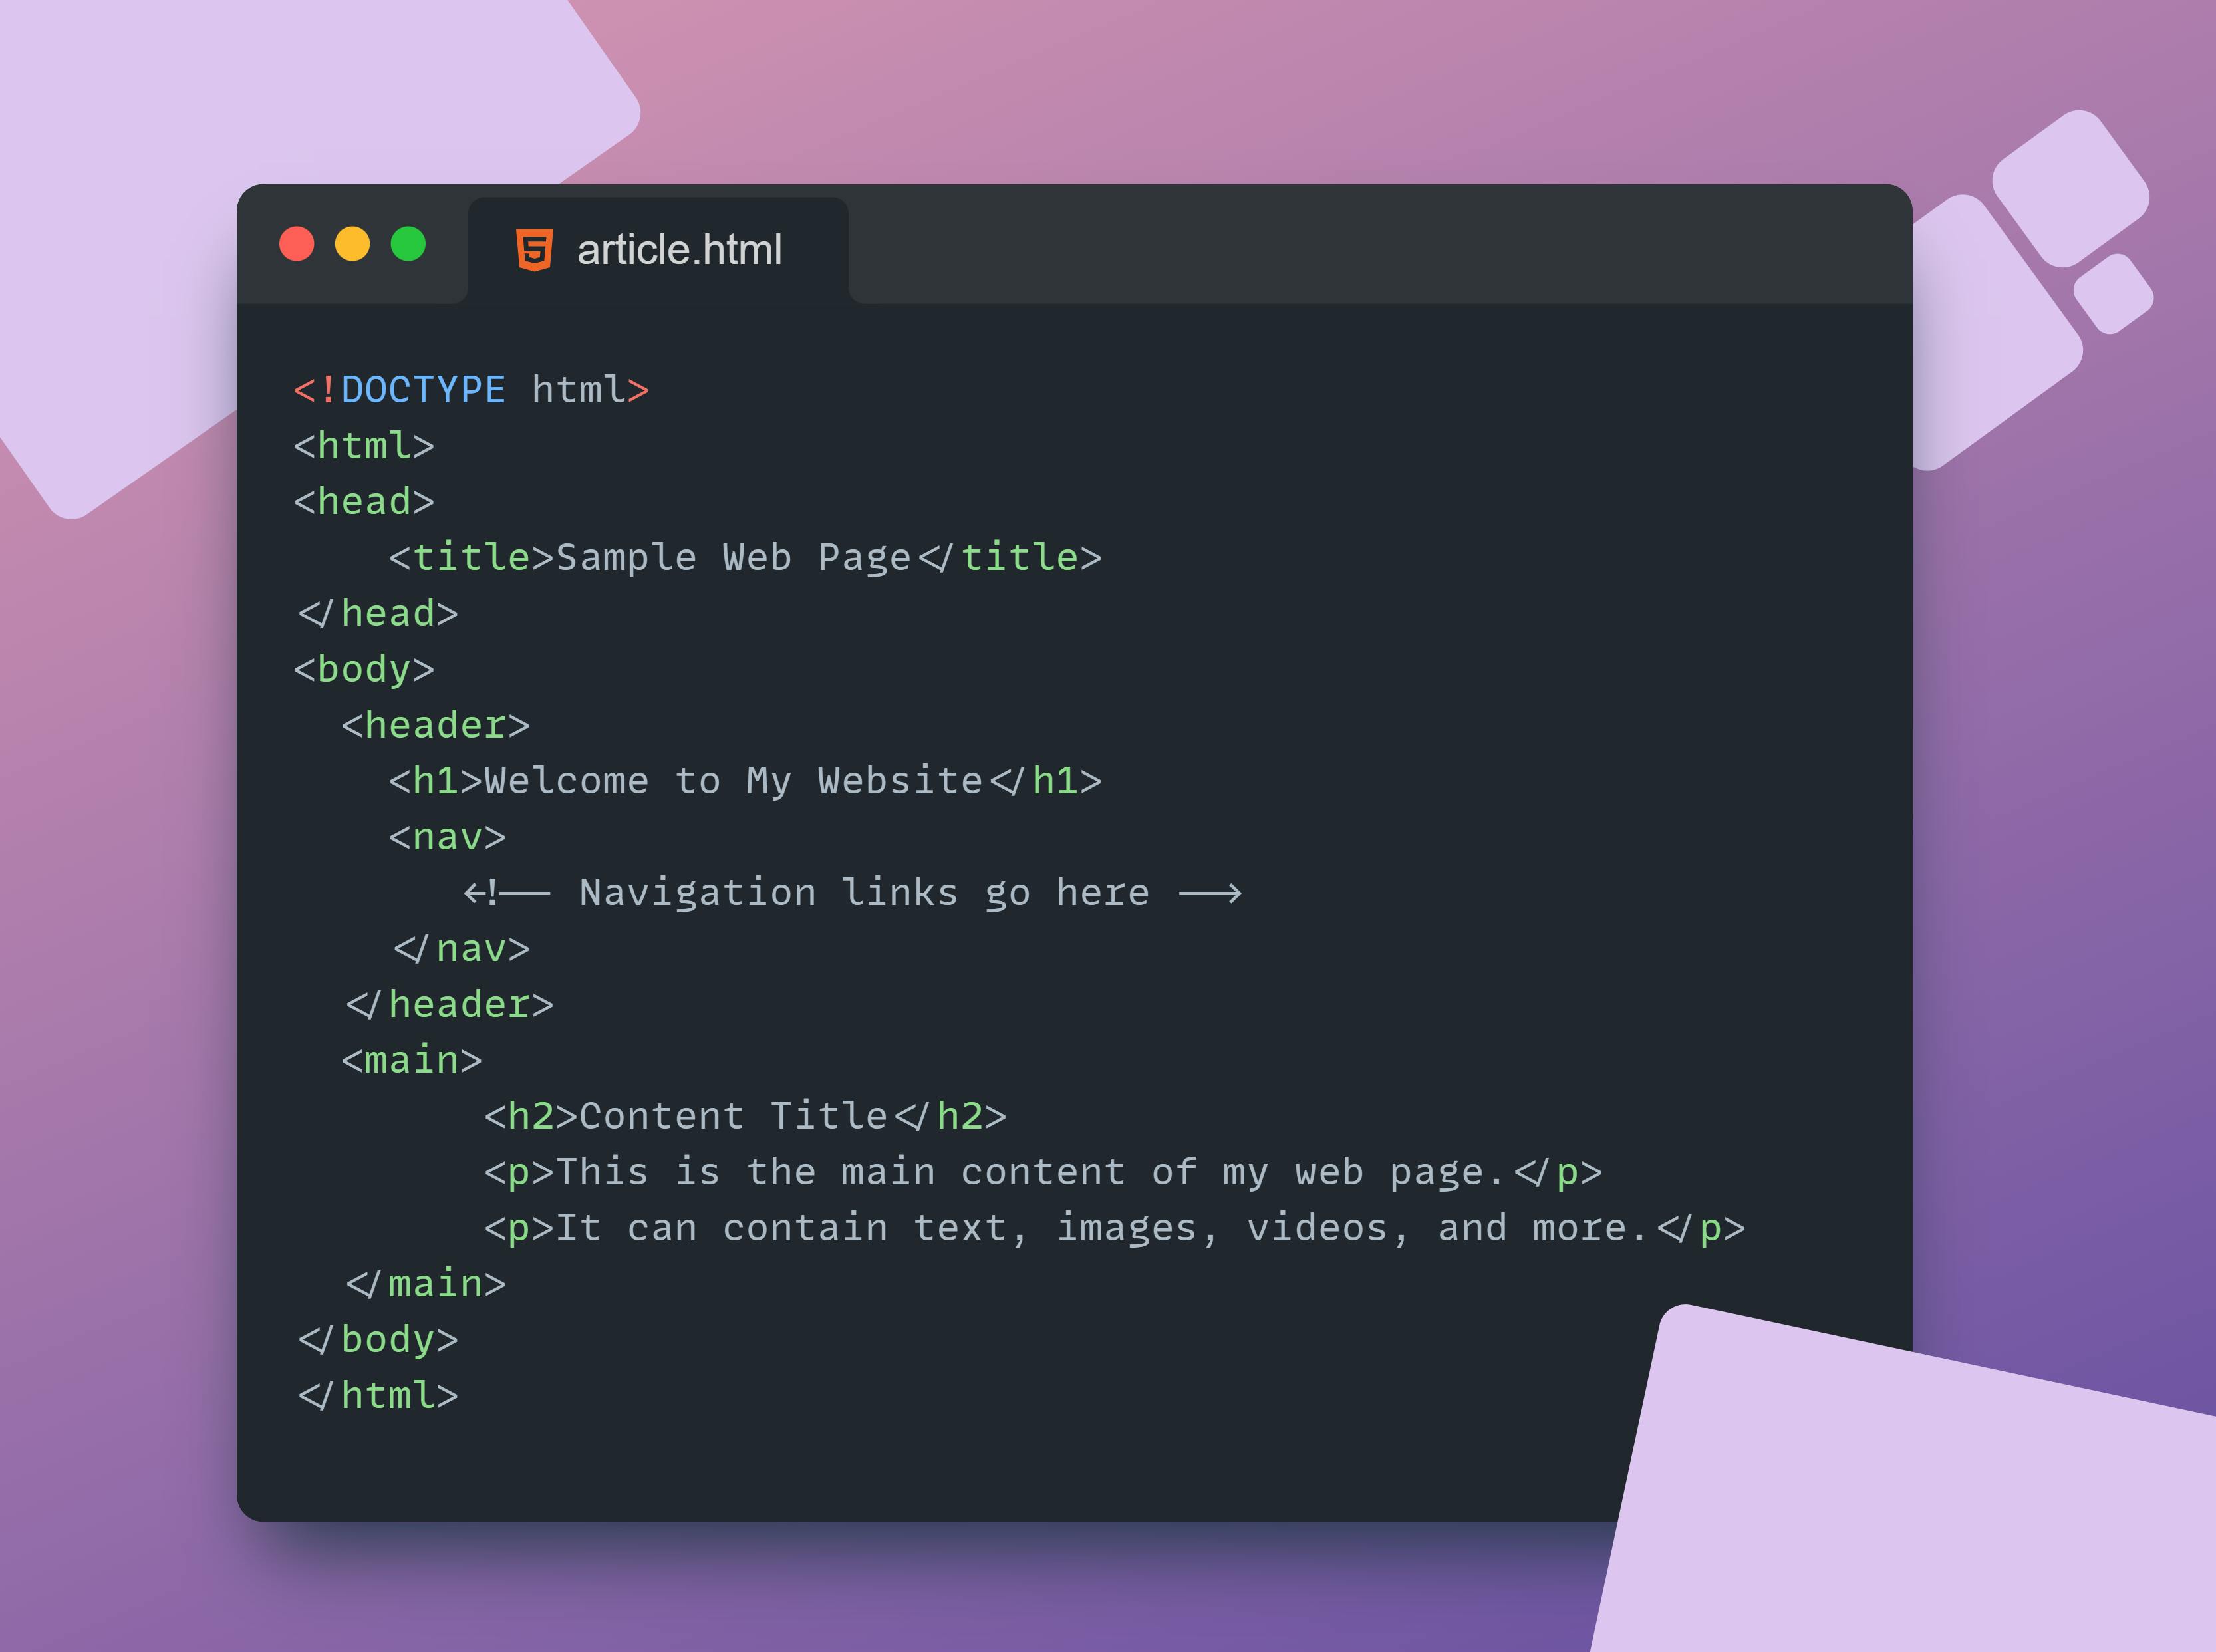 Code snippet showing  tag in HTML